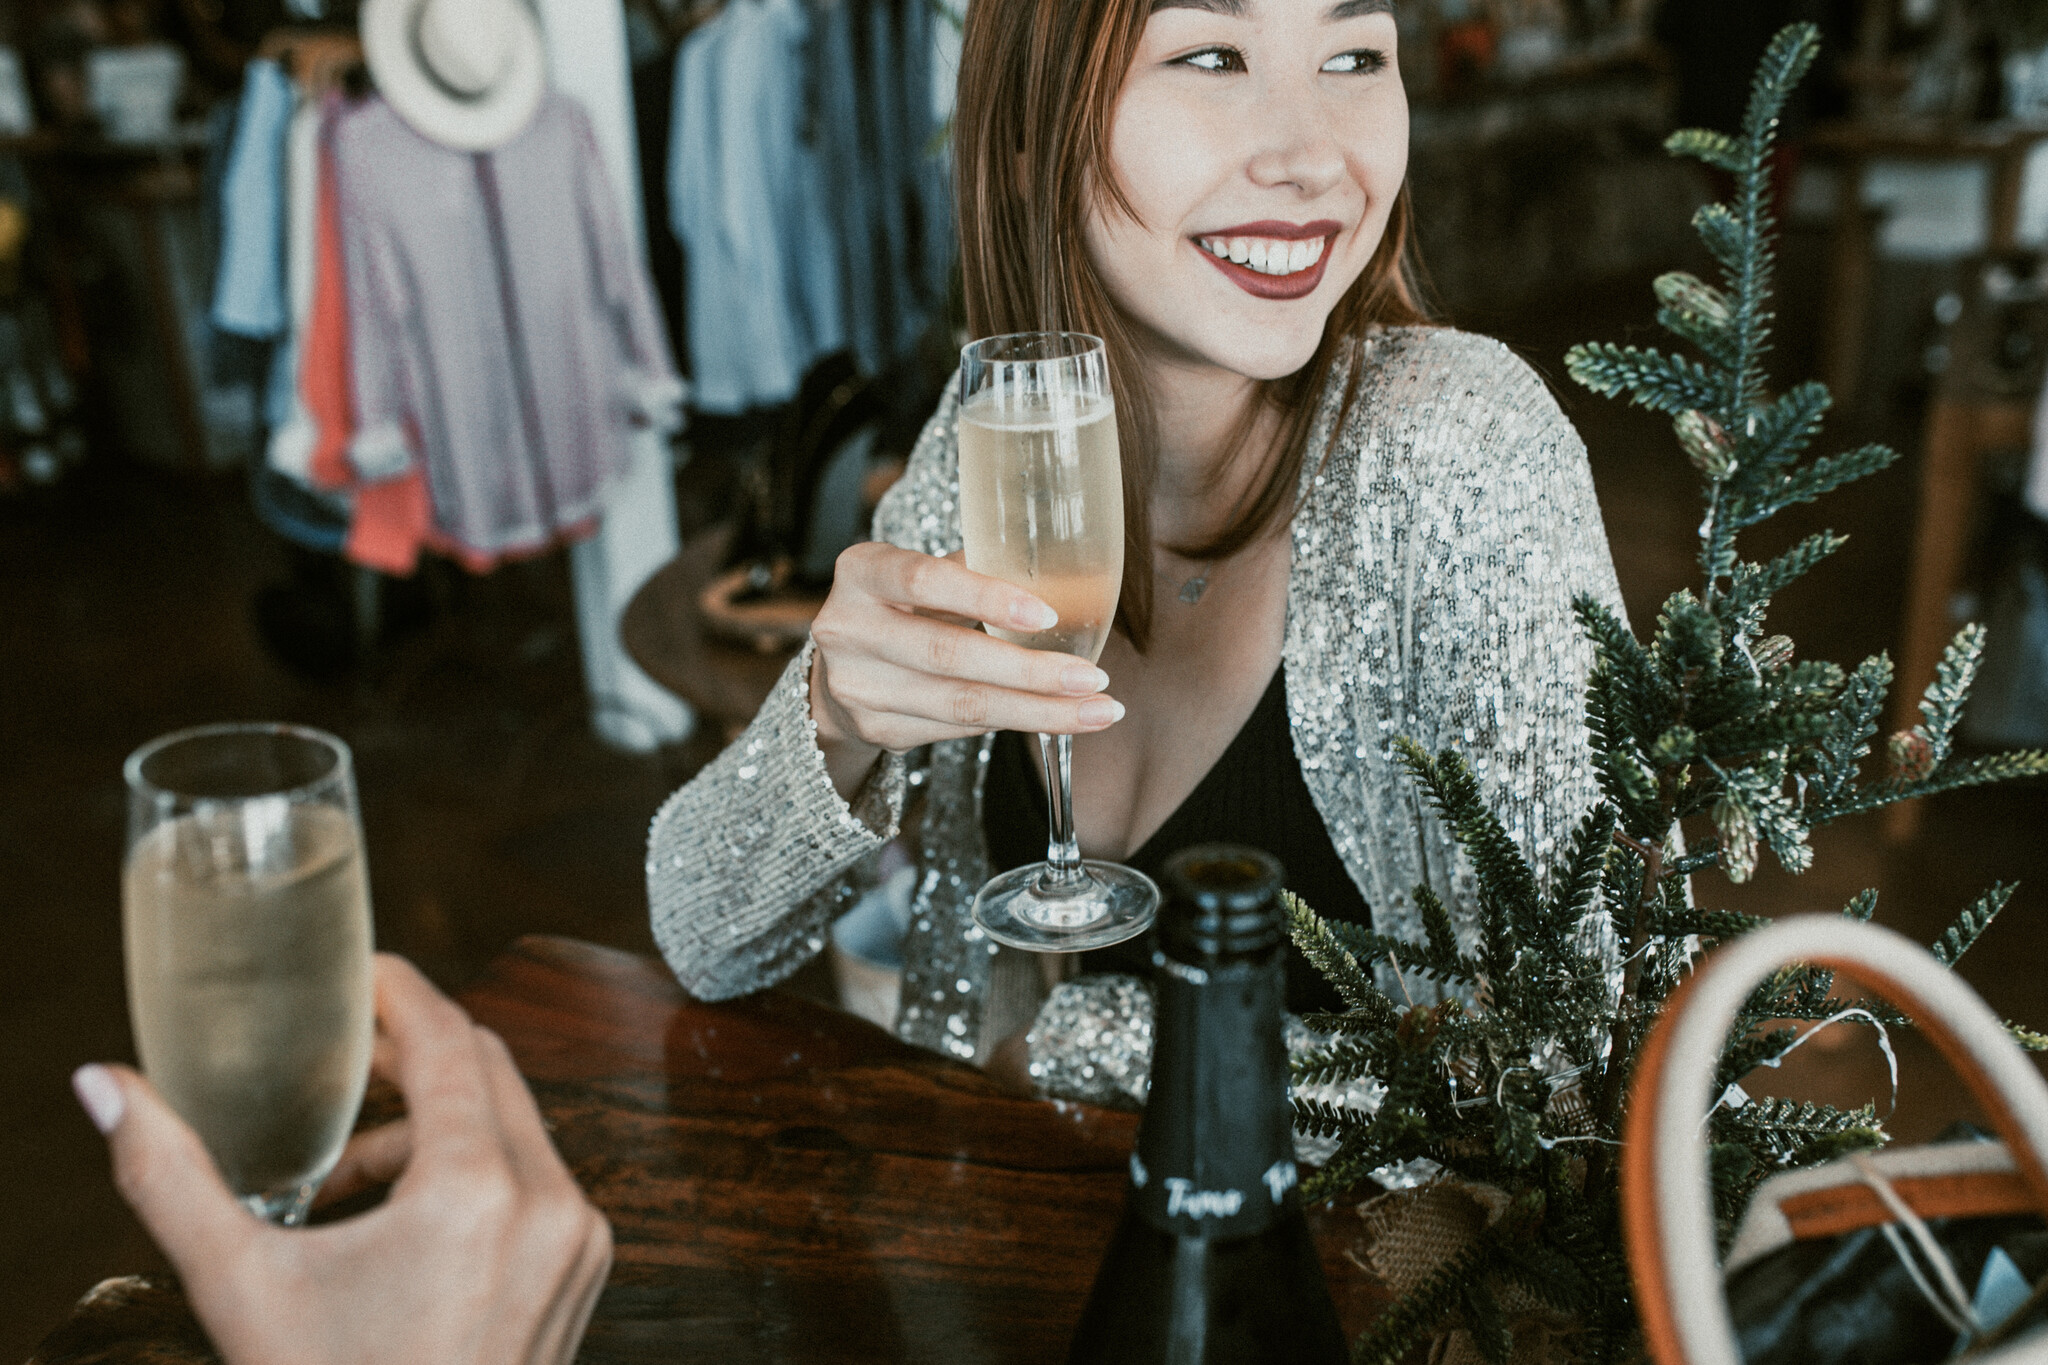 woman smiling raising a glass of champagne